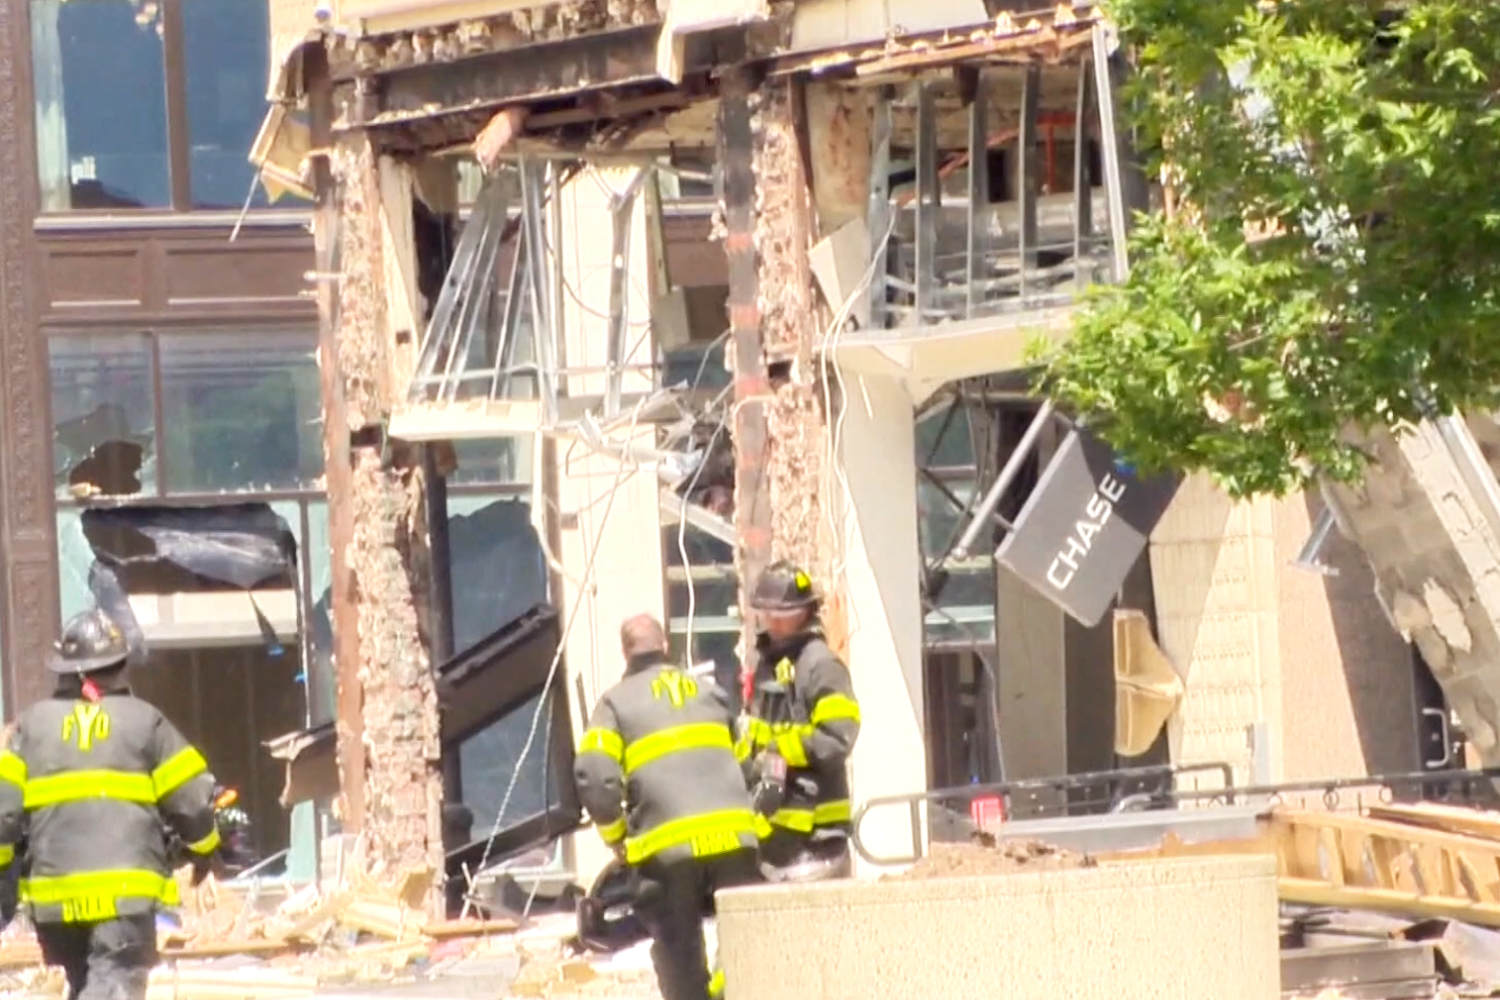 Ohio building explosion caused by crew cutting gas line they thought was off, NTSB says